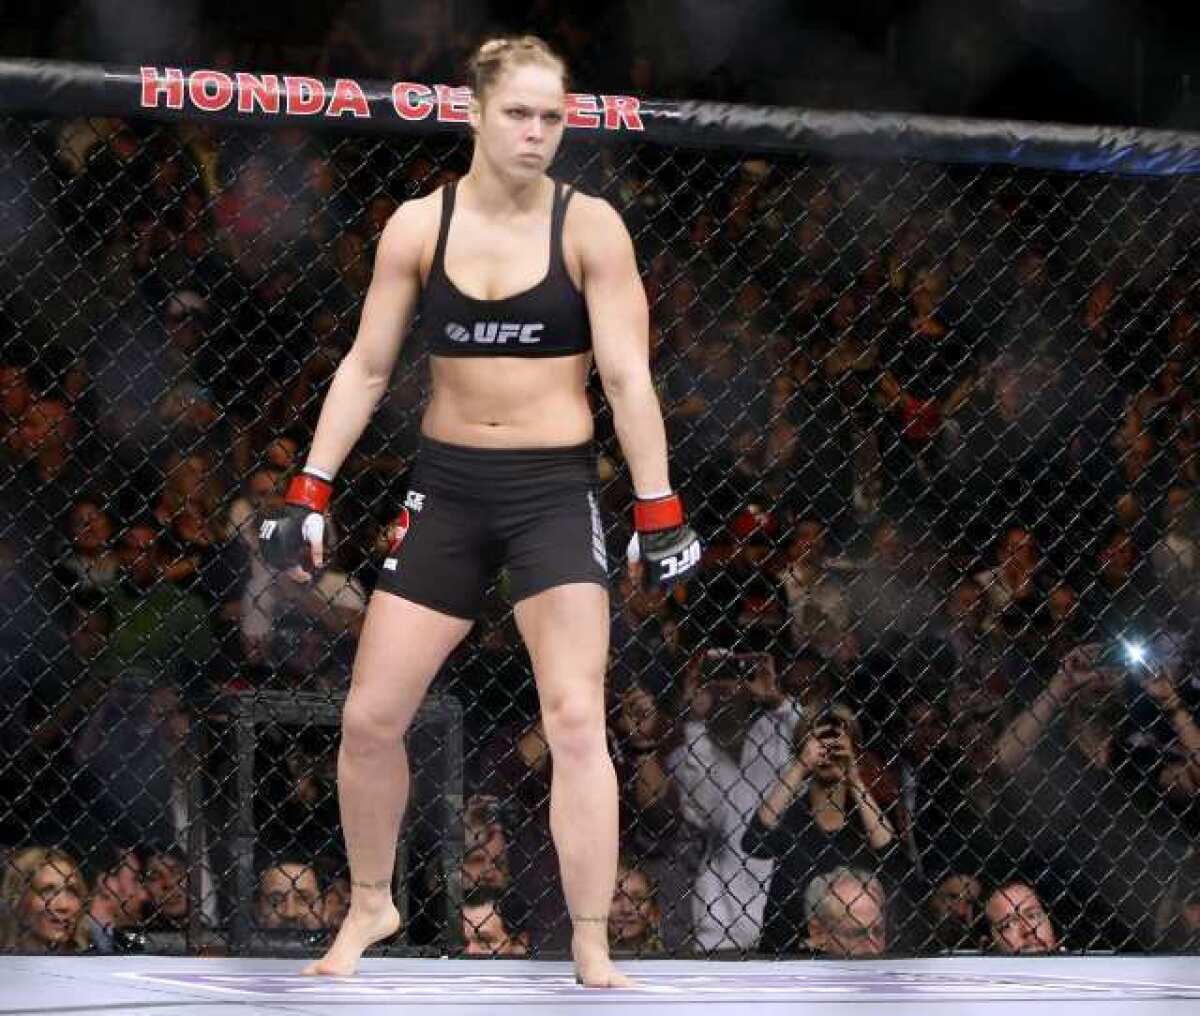 ARCHIVE PHOTO: Ronda Rousey will put her Ultimate Fighting Championship womenÃƒâ€šÃ‚Â¿s bantamweight title on the line against Cat Zingano sometime Ãƒâ€šÃ‚Â¿at the end of the year."